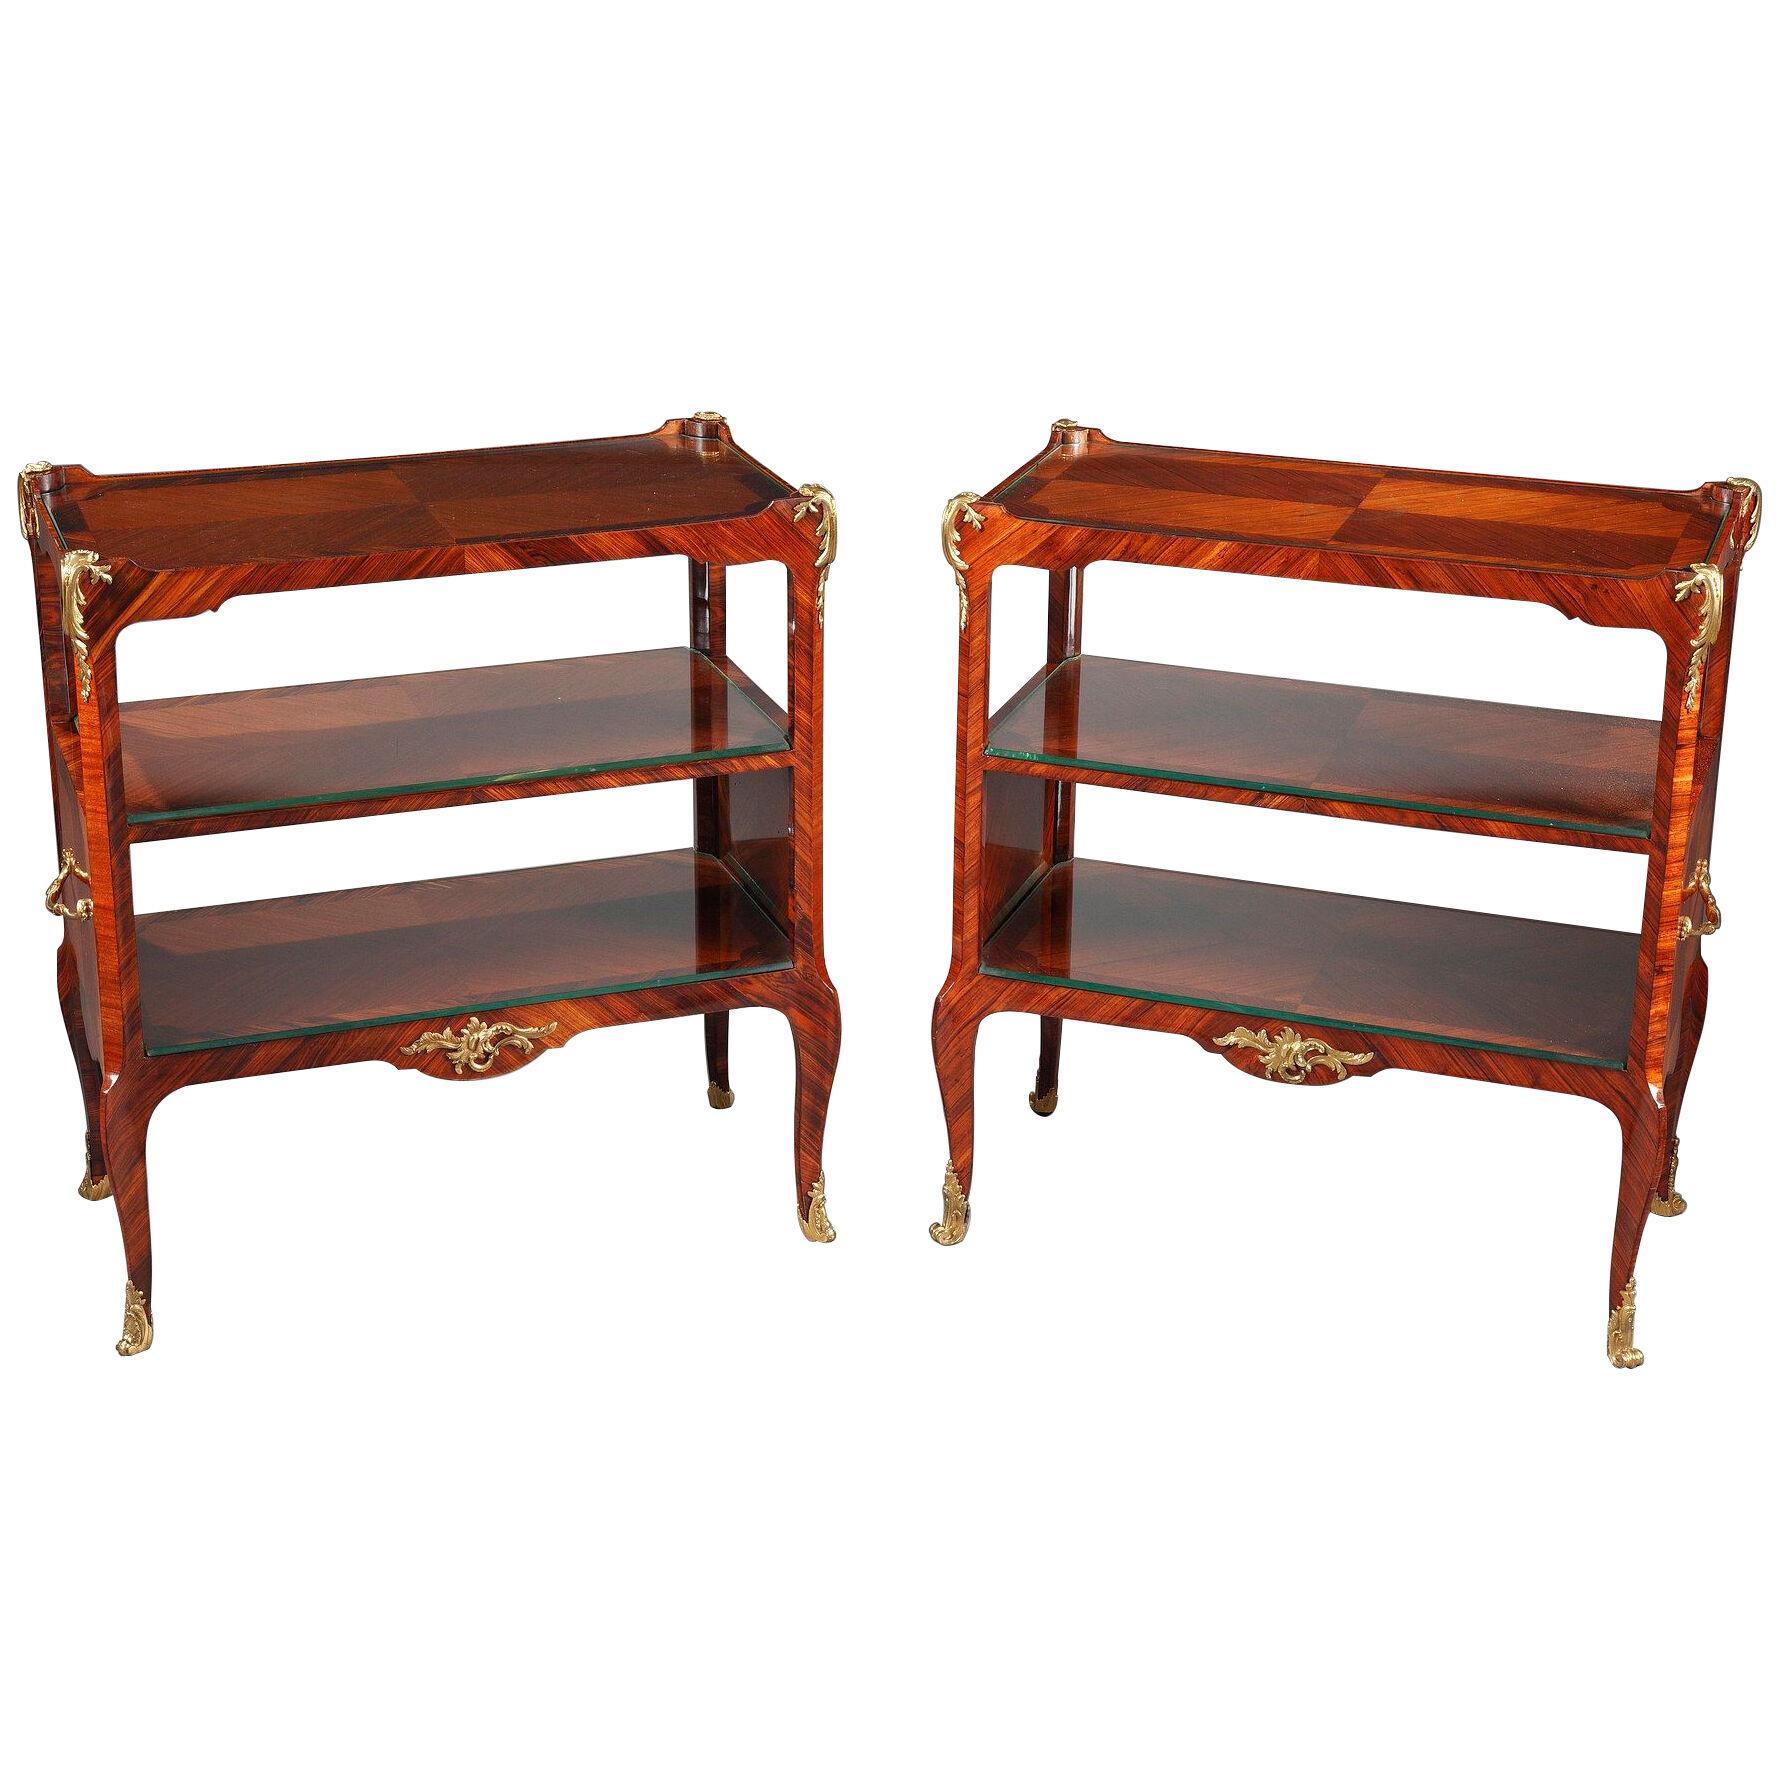 Pair of Transition Style Serving Tables, France, Circa 1880